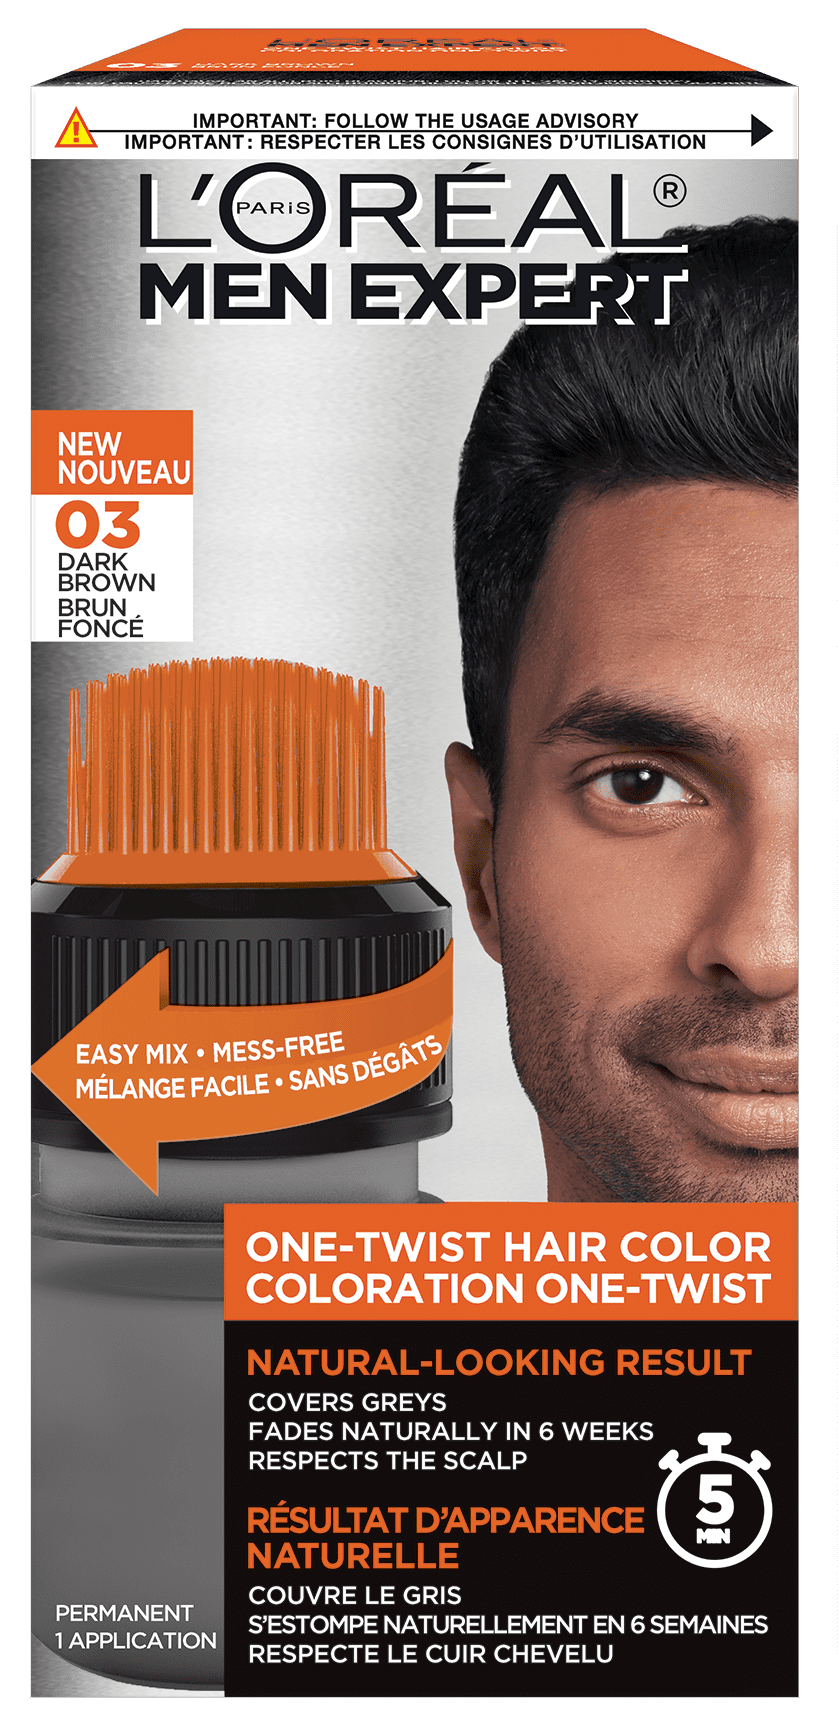 Is coloring cool for Men: Myths & Facts around Mens' Hair | StyleSaute